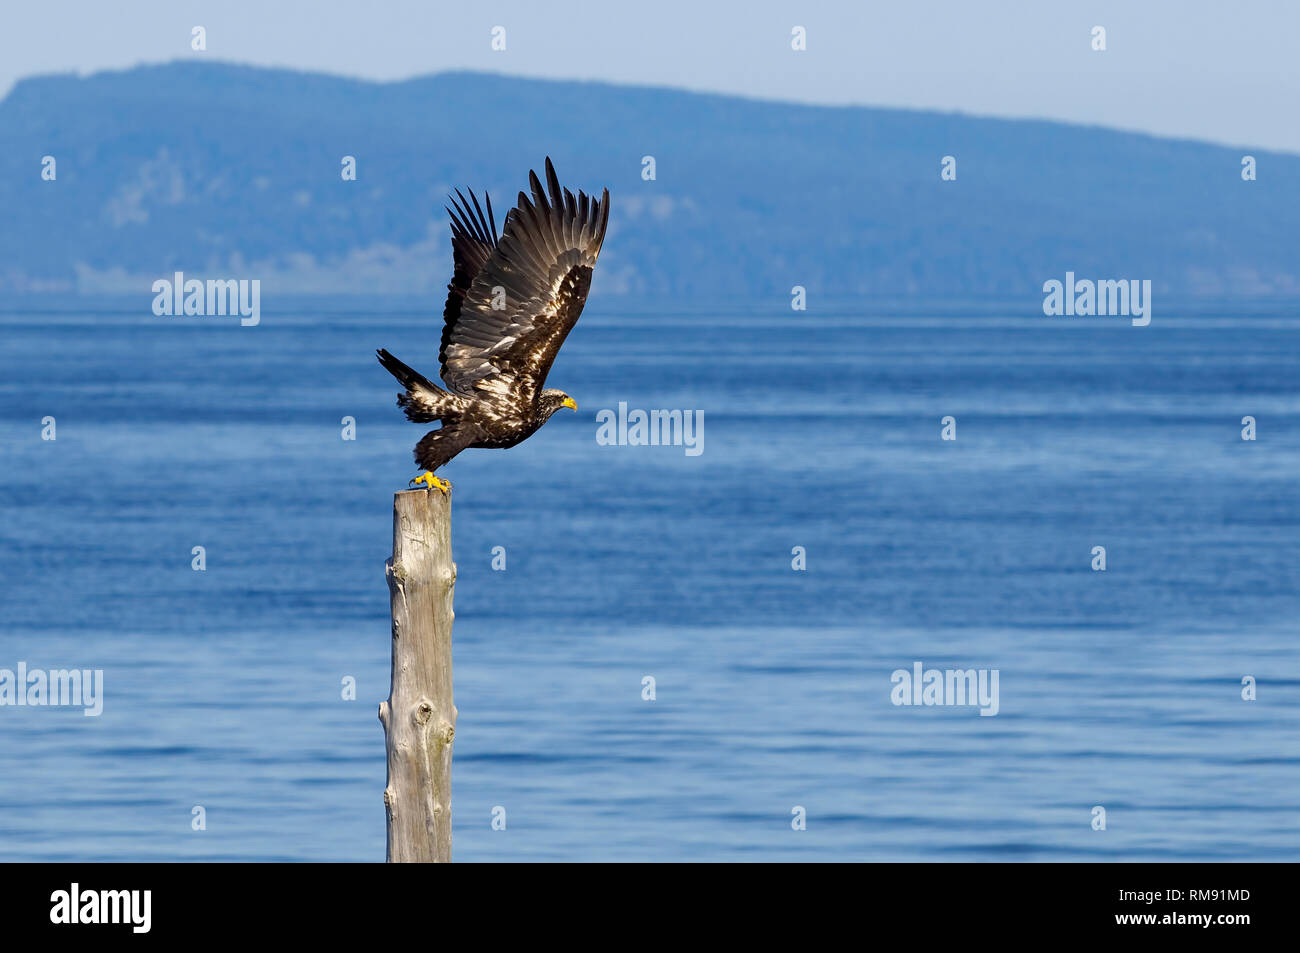 A juvenile Bald Eagle (Haliaeetus leucocephalus) taking flight from a wooden stump with mountains and ocean in the background. Stock Photo